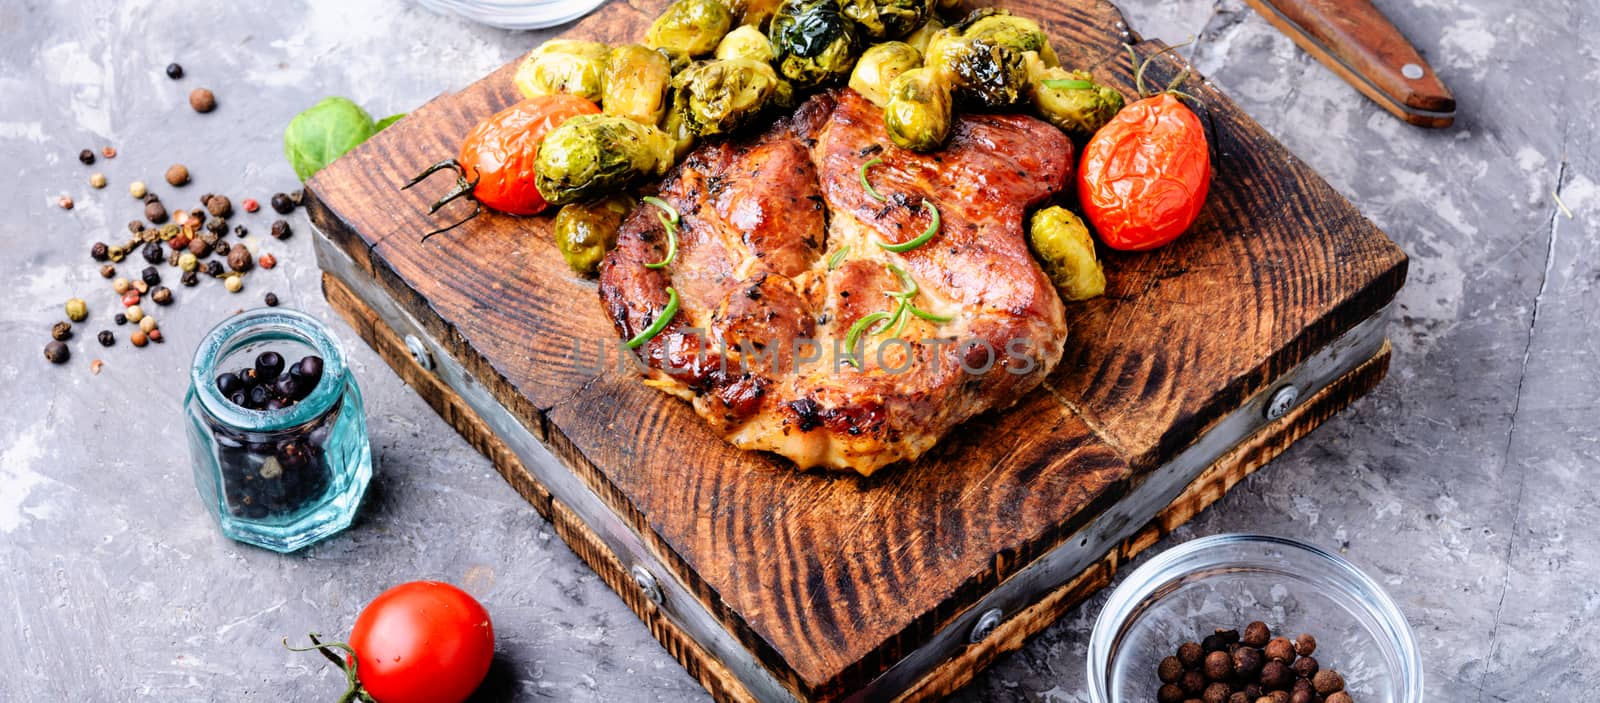 Meat steak with brussels sprouts by LMykola